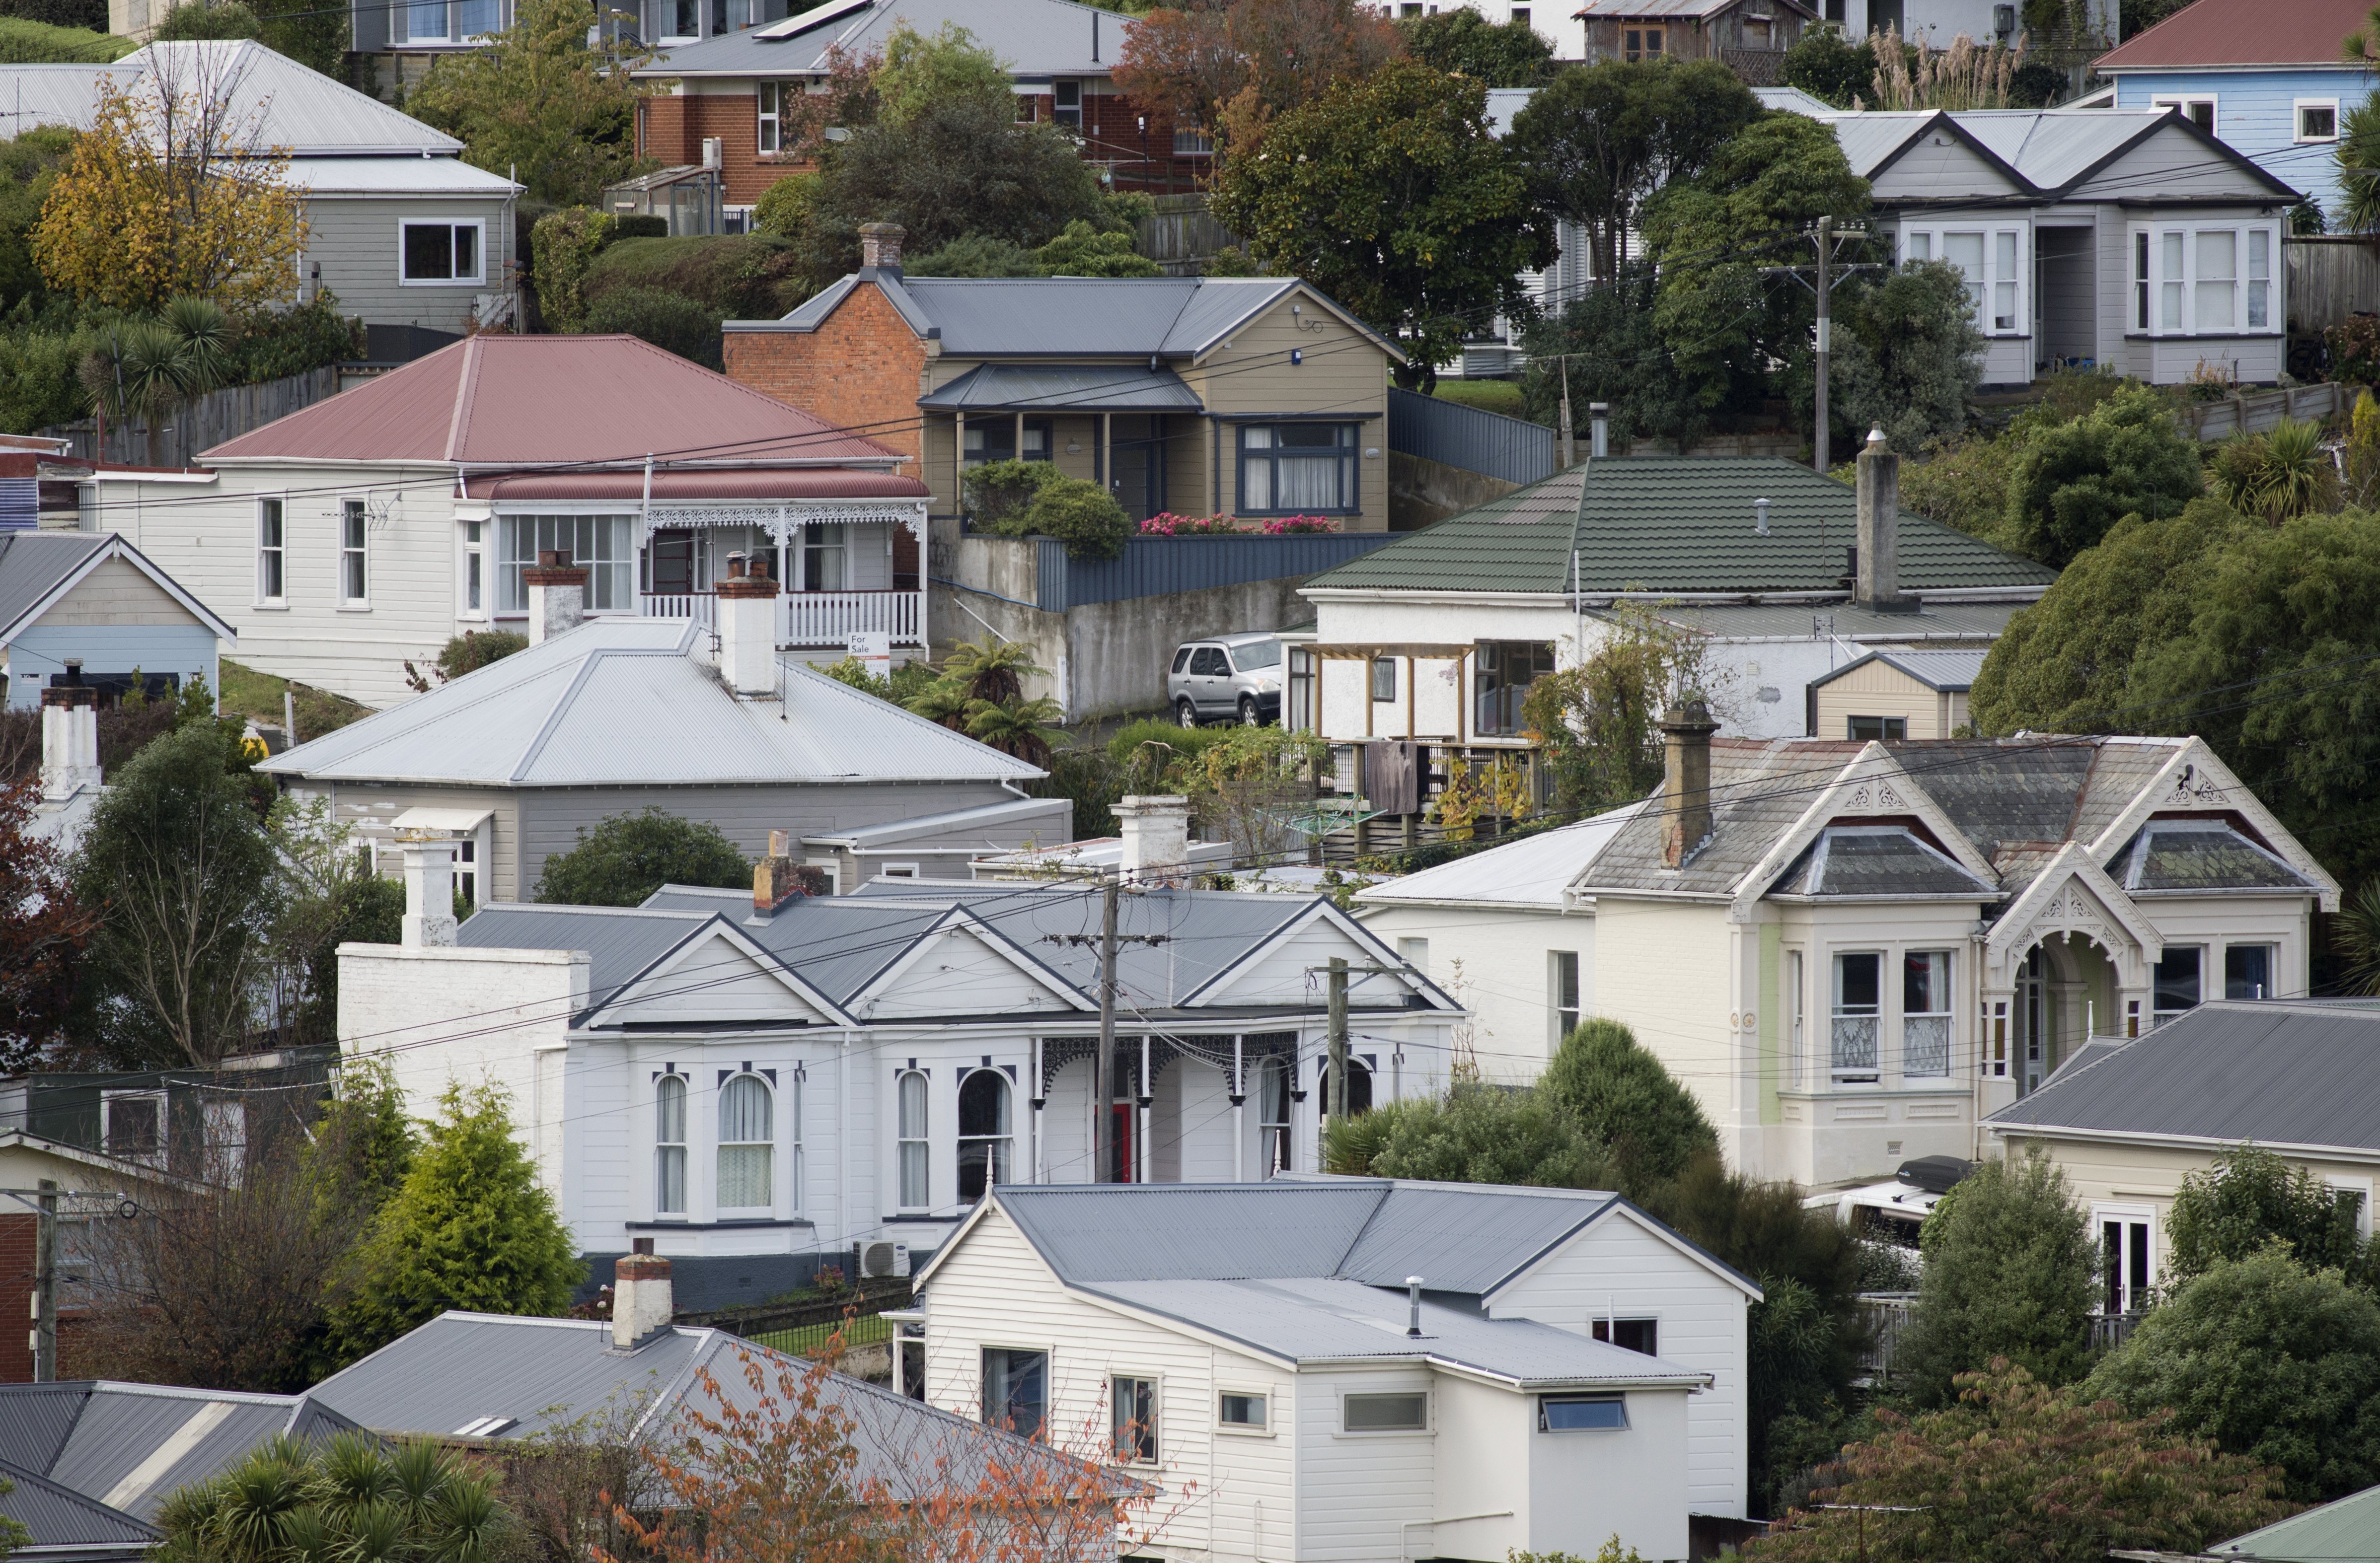 Property values in the lower half of Dunedin’s property market have dropped by 8.1%. PHOTO:...